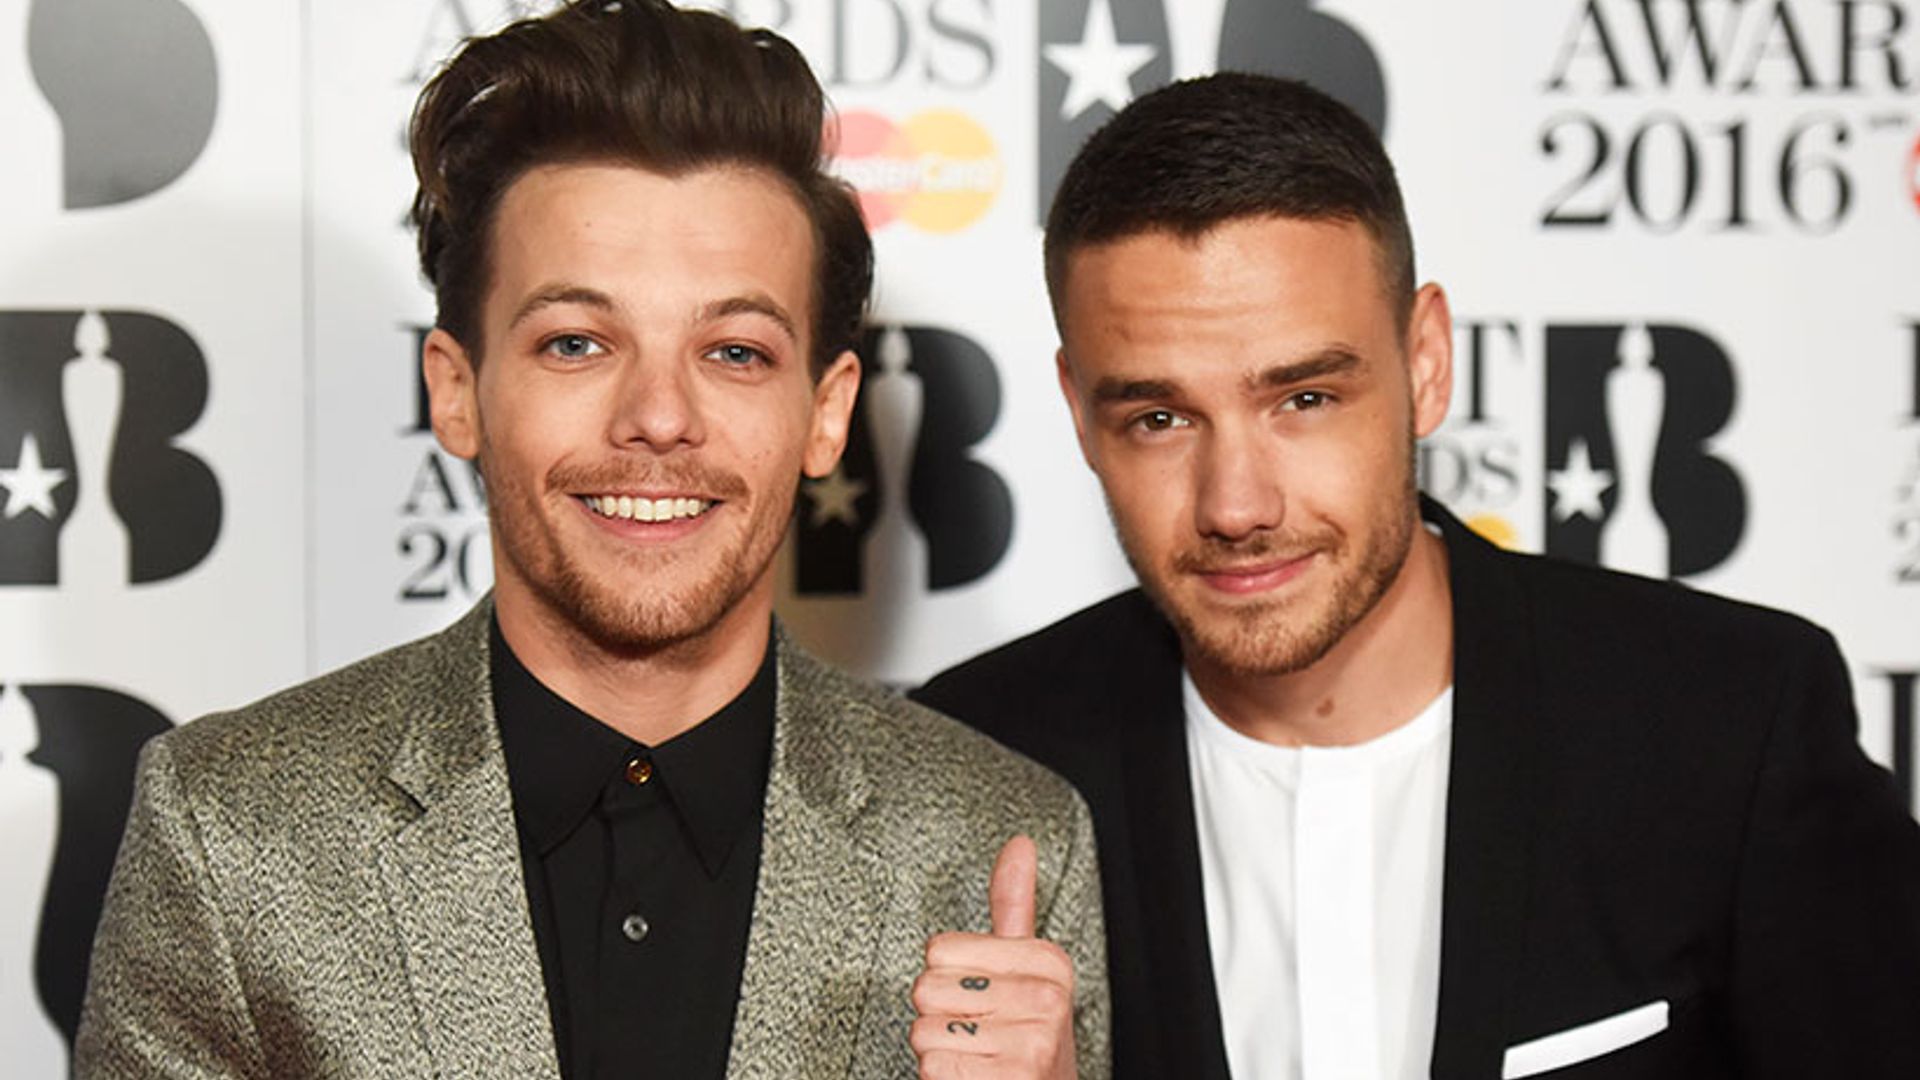 Liam Payne and Louis Tomlinson's sons are friends!